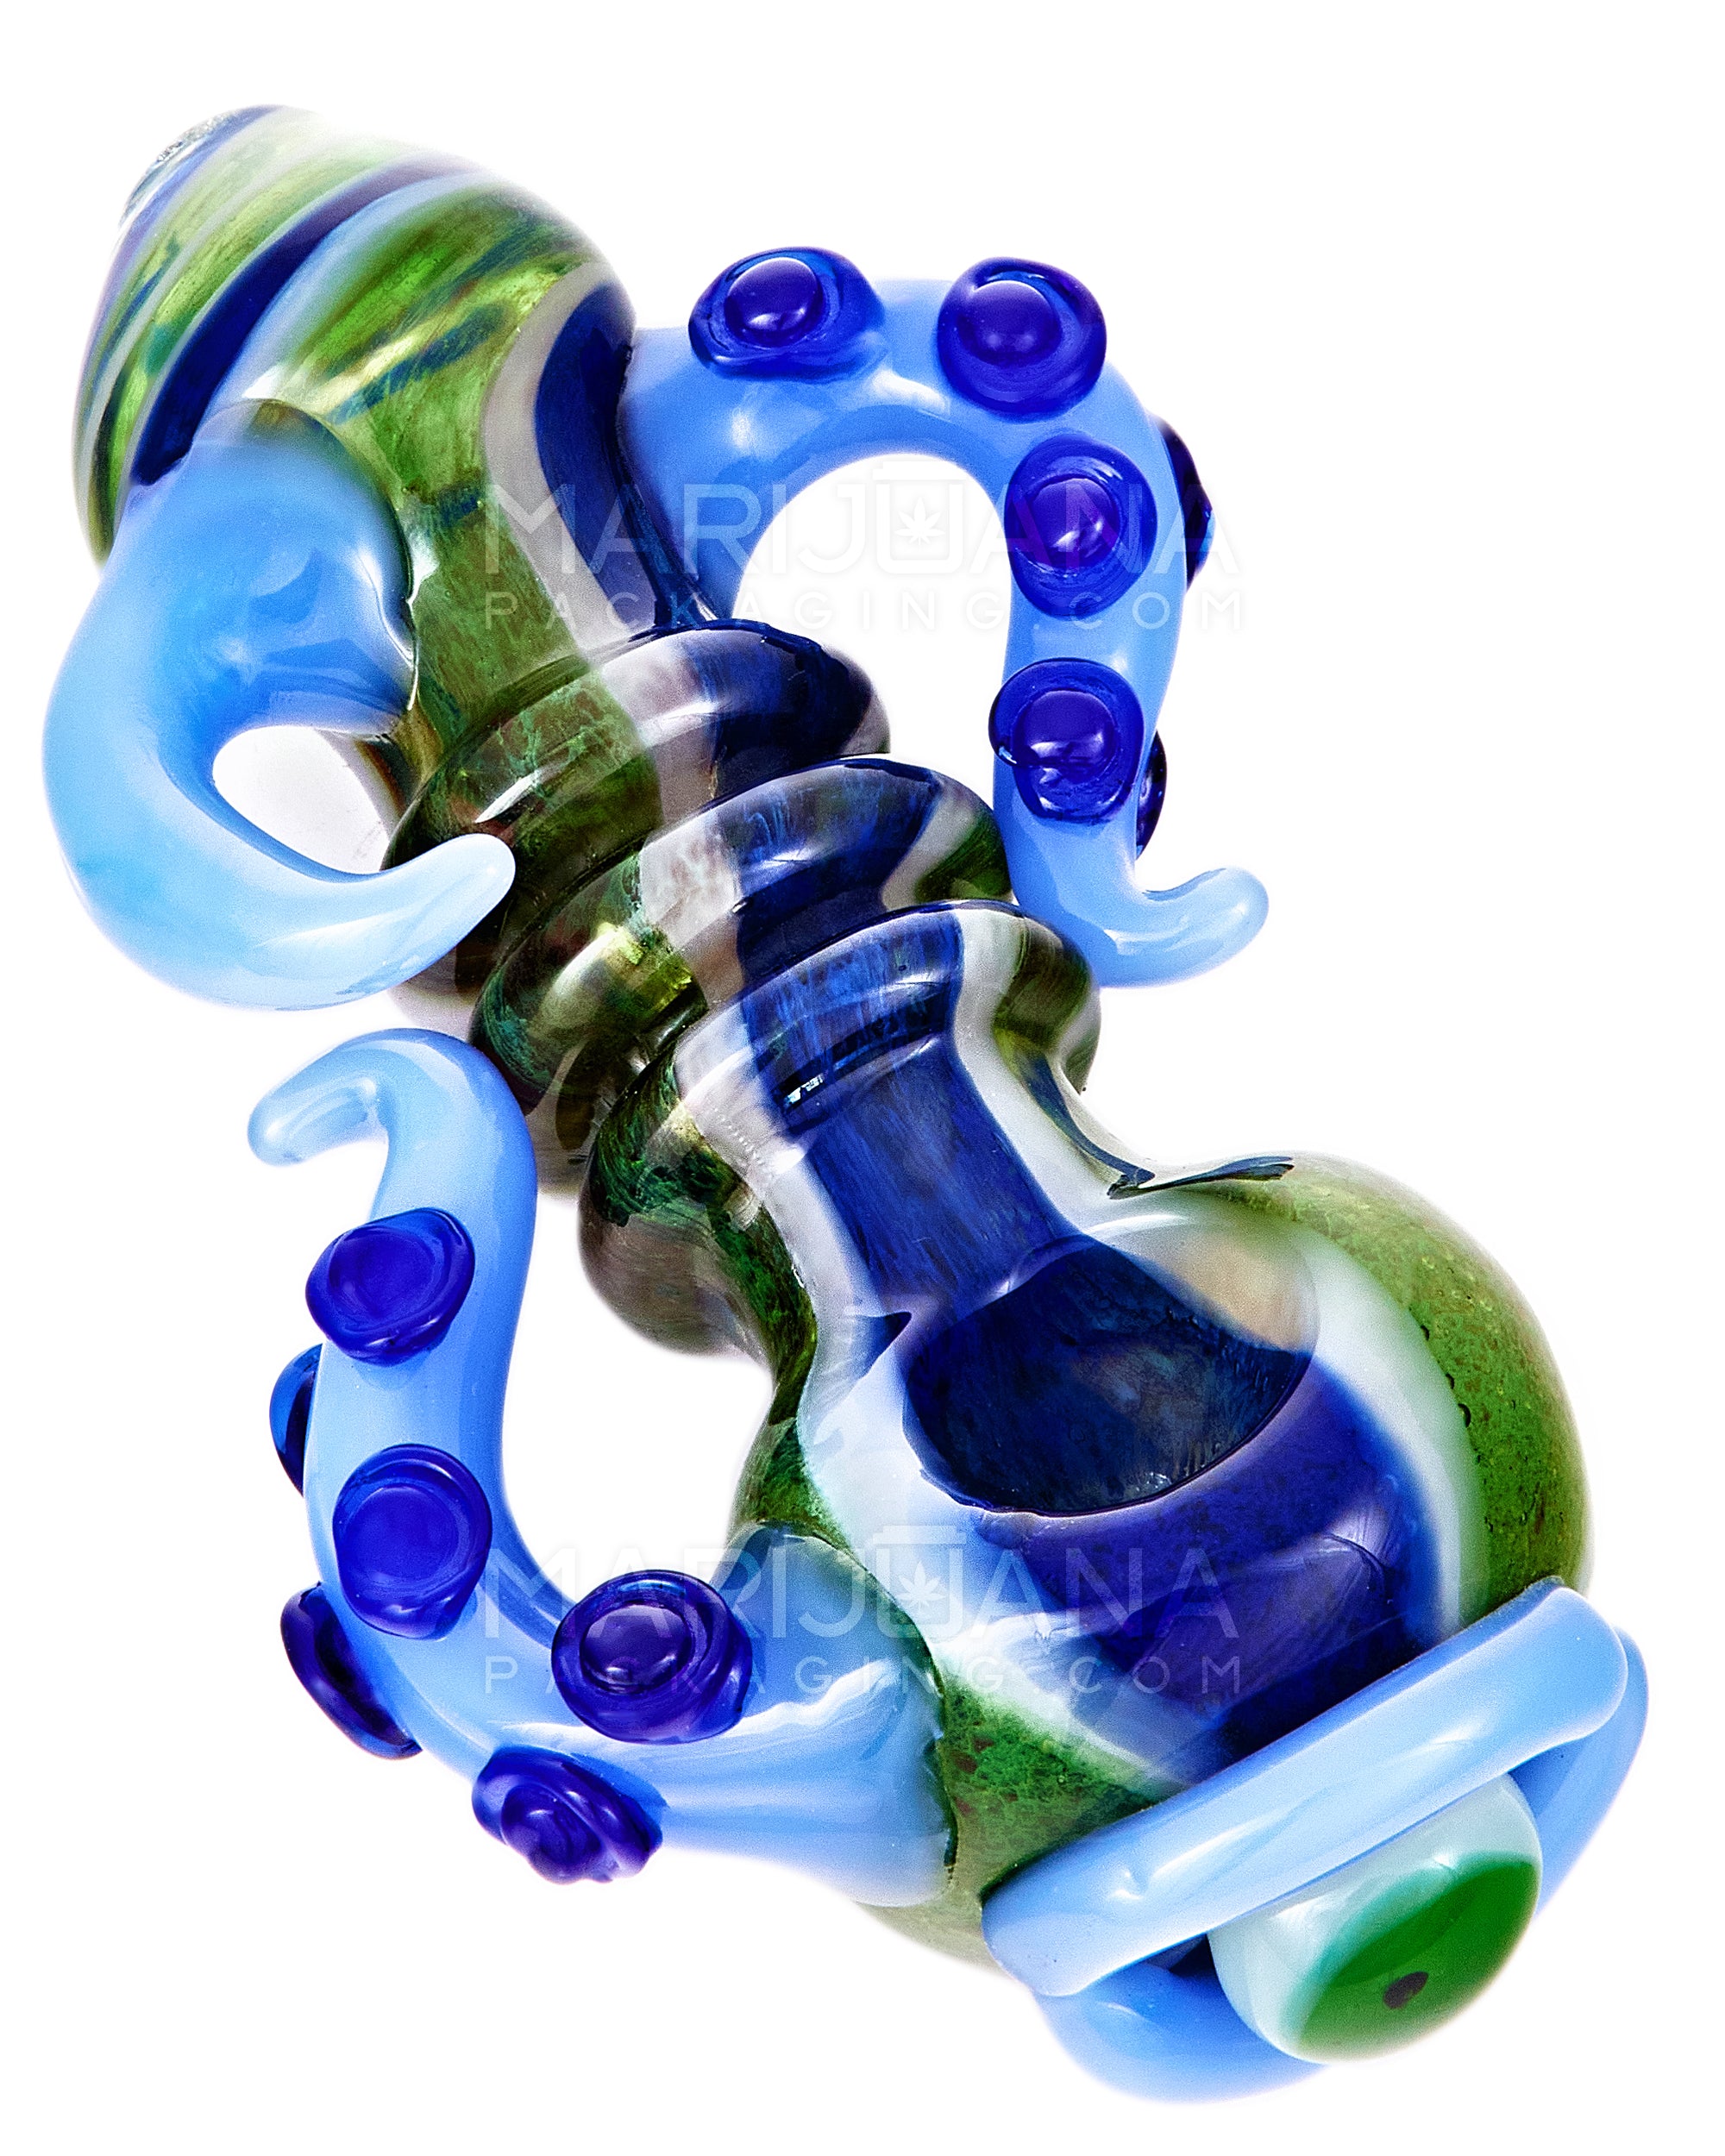 Heady | Triple Ringed Frit Kraken Spoon Hand Pipe w/ Marble Eye & Double Tentacles | 6in Long - Very Thick Glass - 7